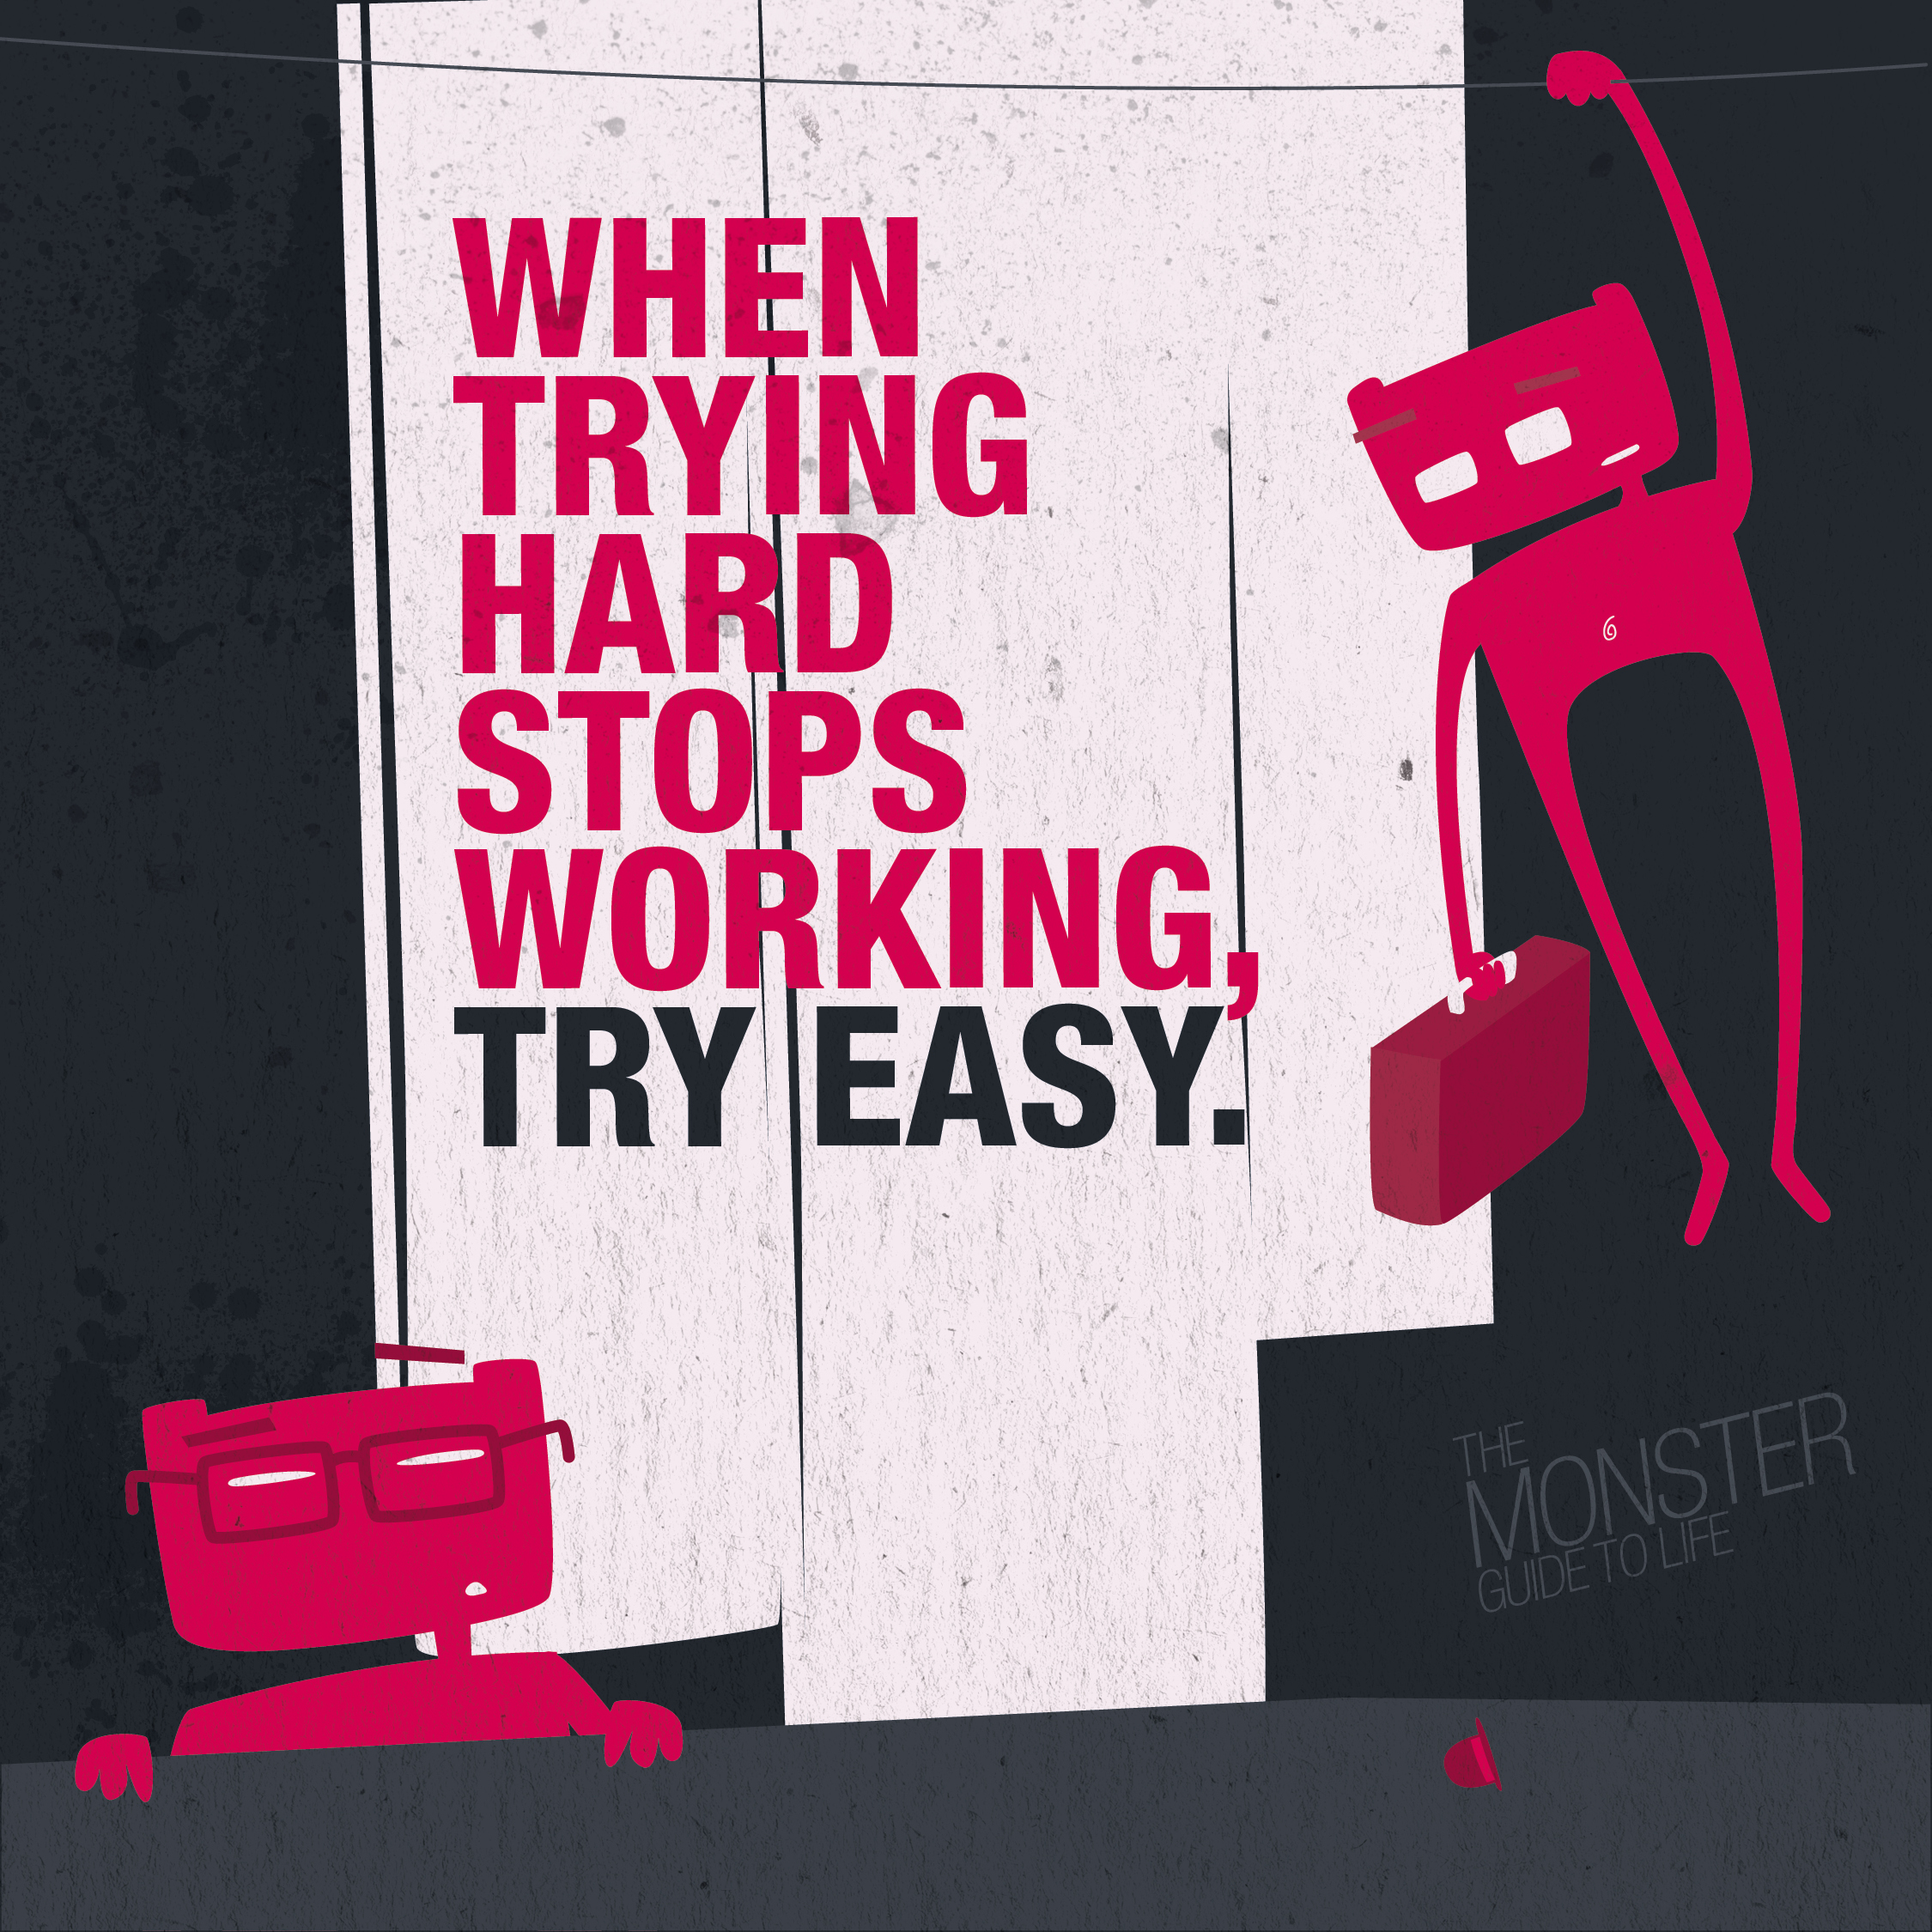 When trying hard stops working, try easy